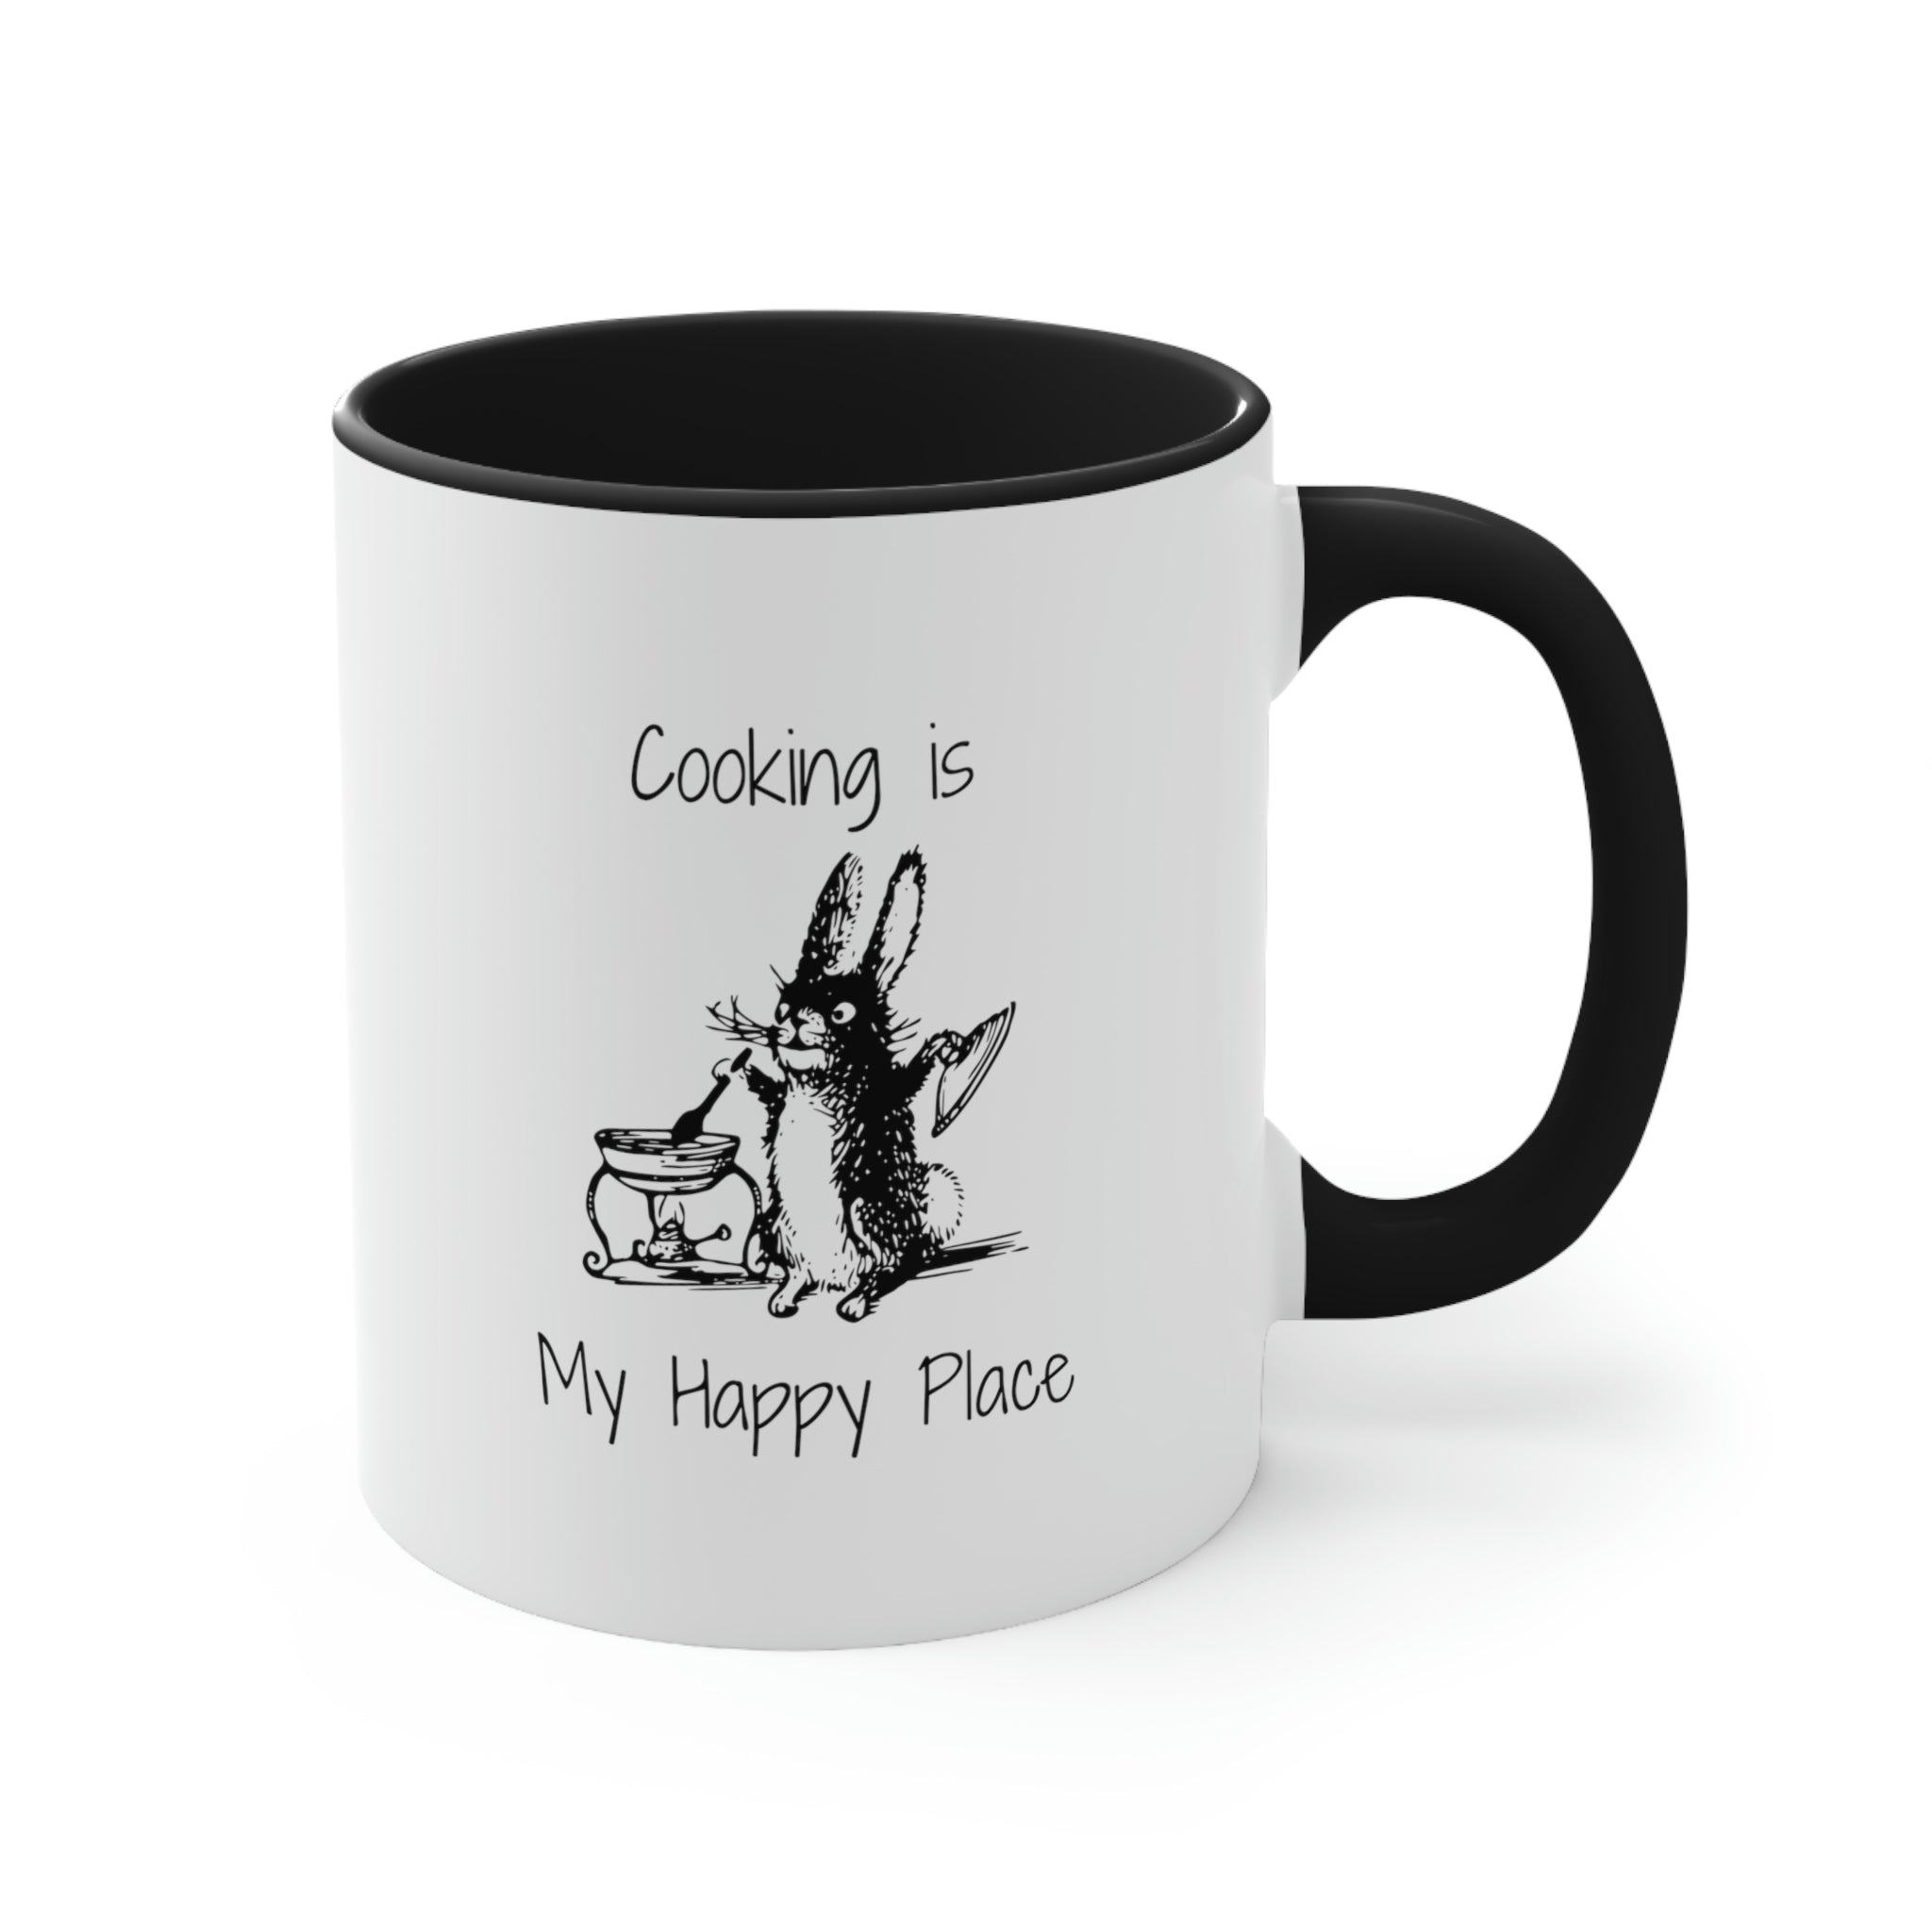 Coffee Mug, Cooking is My Happy Place 11oz Ceramic Mug with Light-Hearted Design, Dishwasher and Microwave Safe, Perfect Gift for Hot Beverage Lovers - cooking mug 1